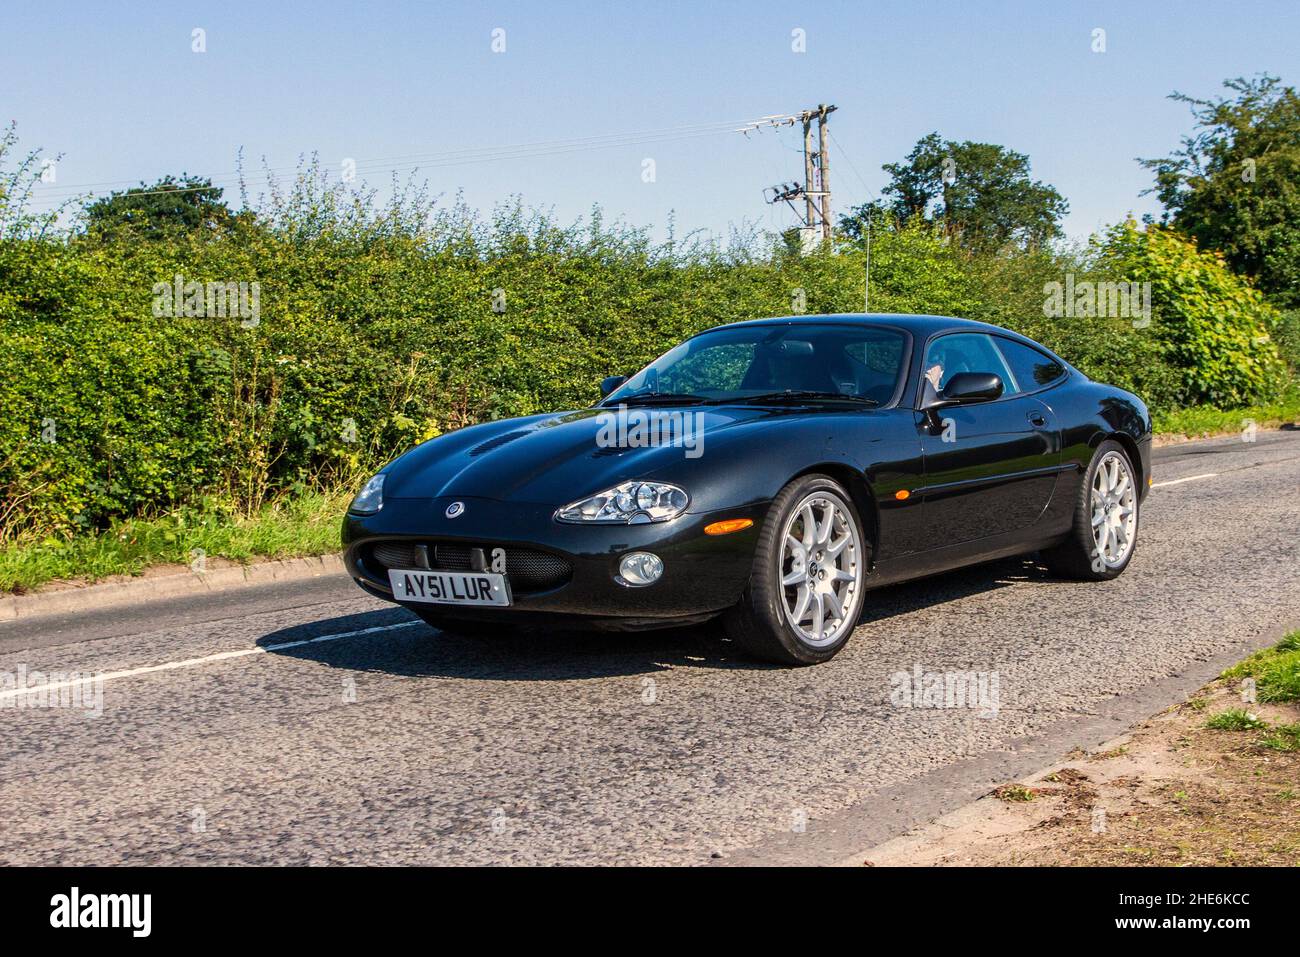 2001 black Jaguar XKR 3996cc automatic, 5.0 V8 supercharged 2dr auto coupe en-route to Capesthorne Hall classic July car show, Cheshire, UK Stock Photo